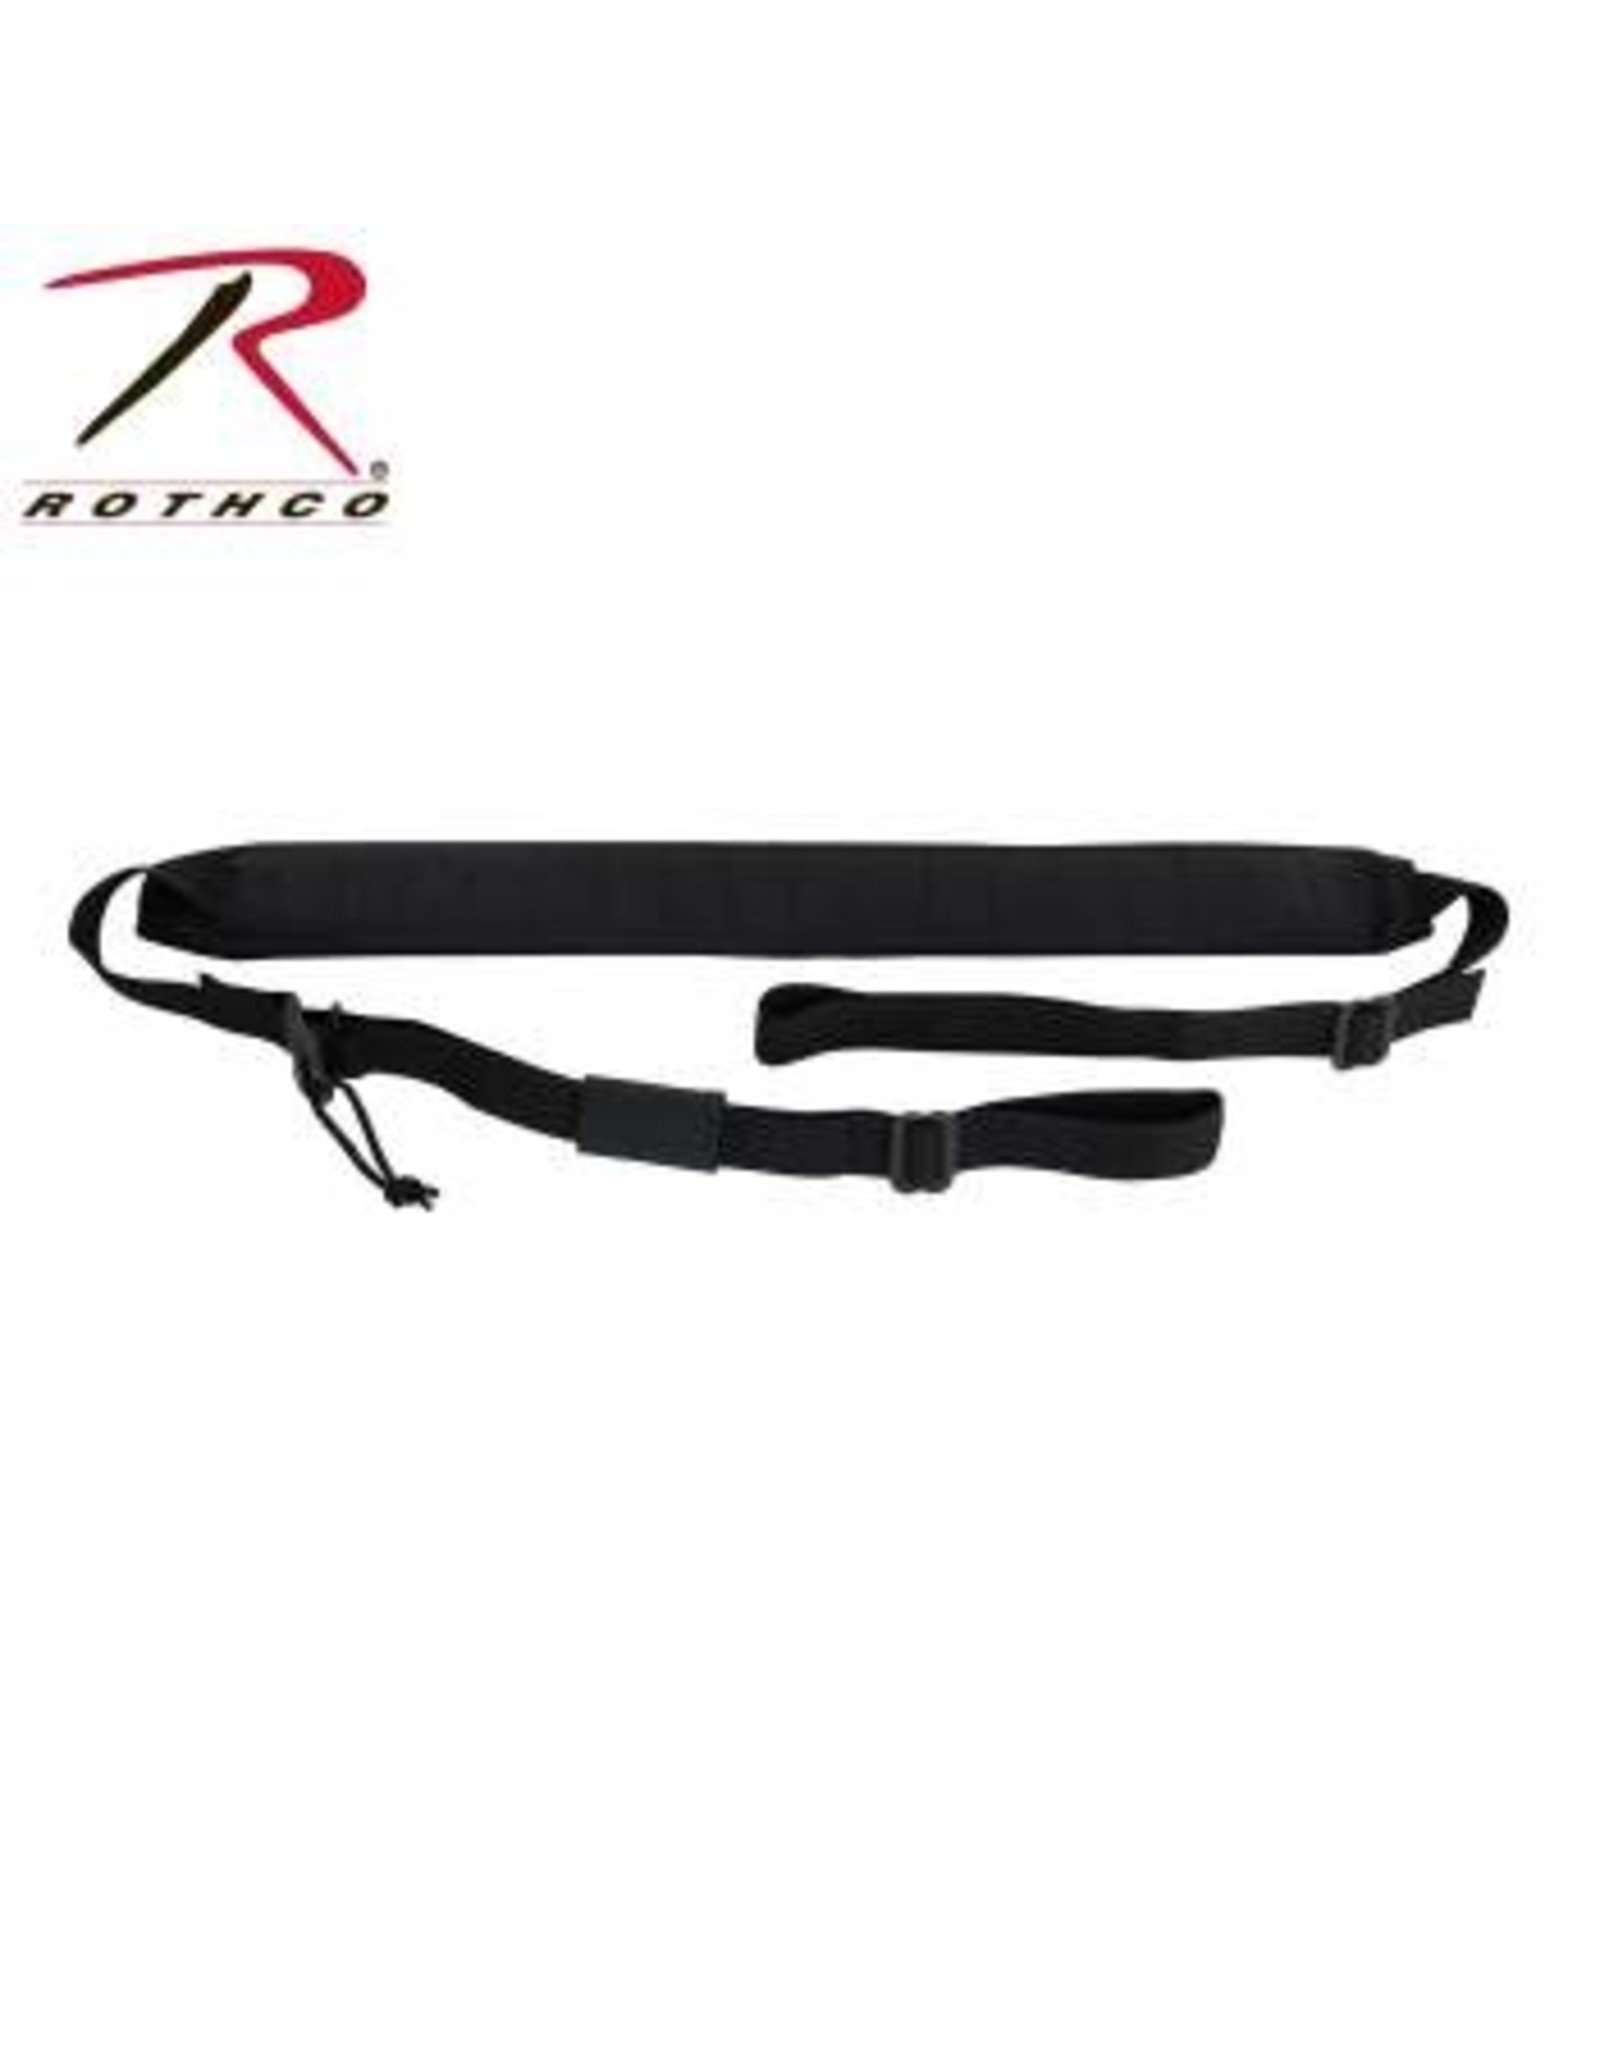 ROTHCO LASER CUT MOLLE 2-POINT PADDED RIFLE SLING